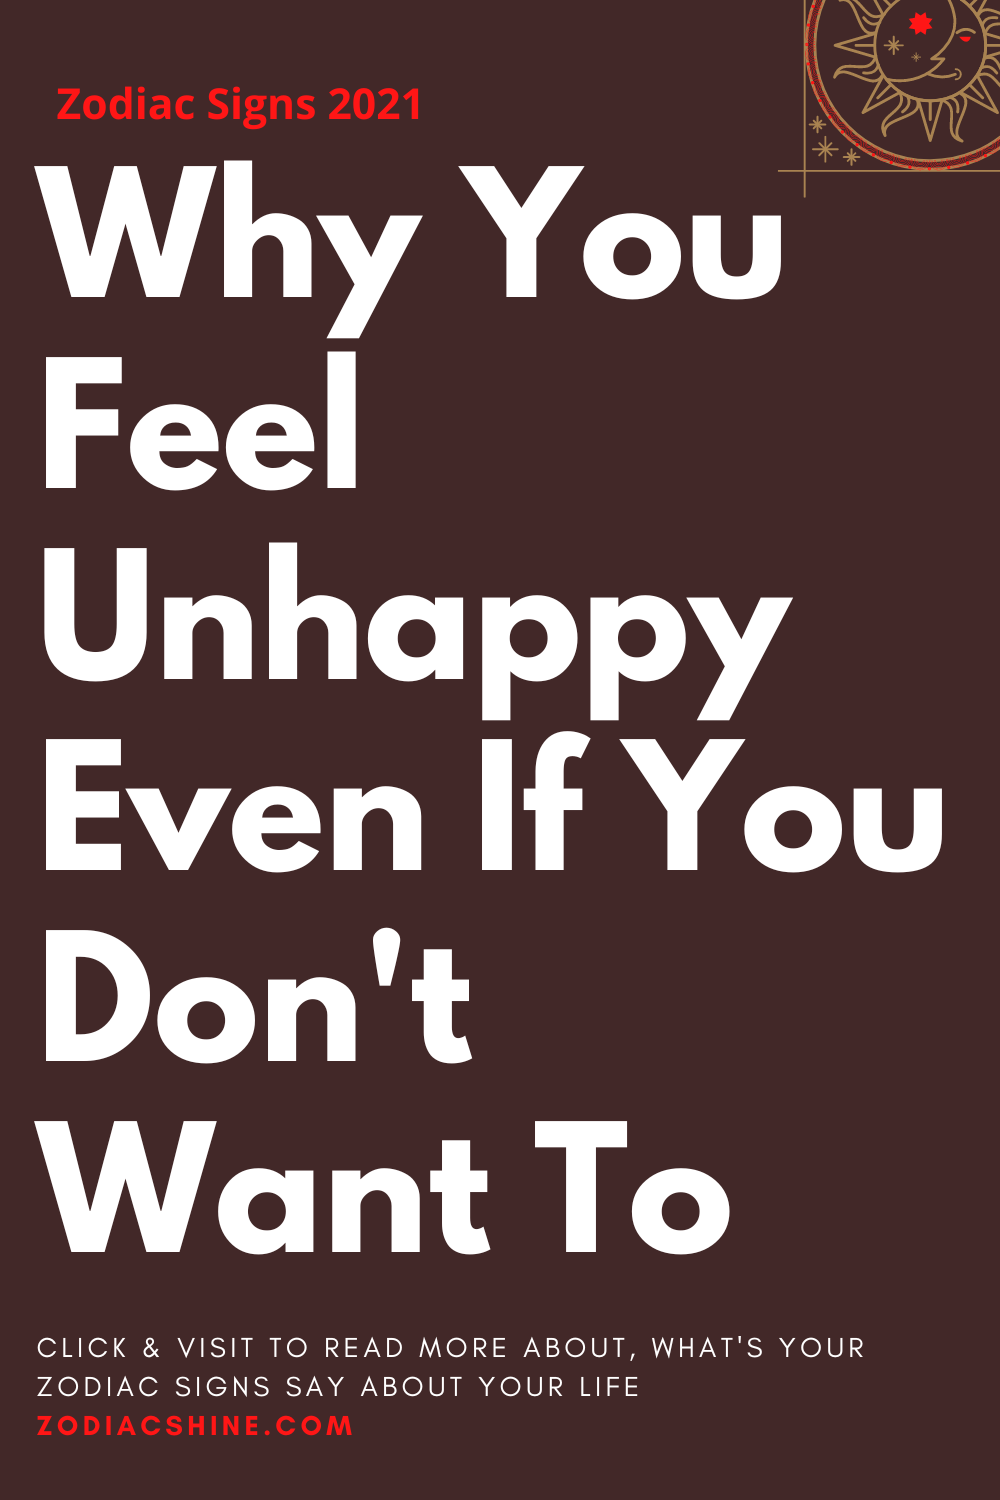 Why You Feel Unhappy Even If You Don't Want To